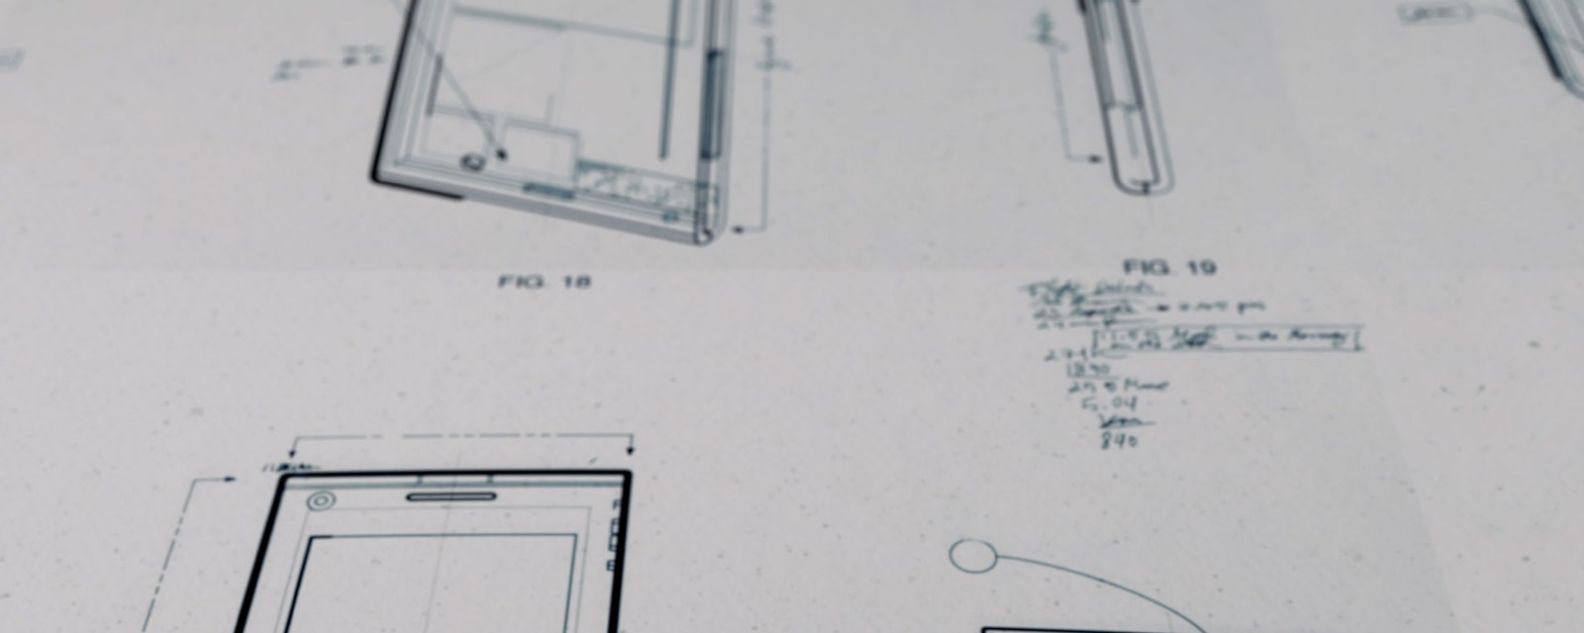 Drafting paper with drawings of mechanical schematics